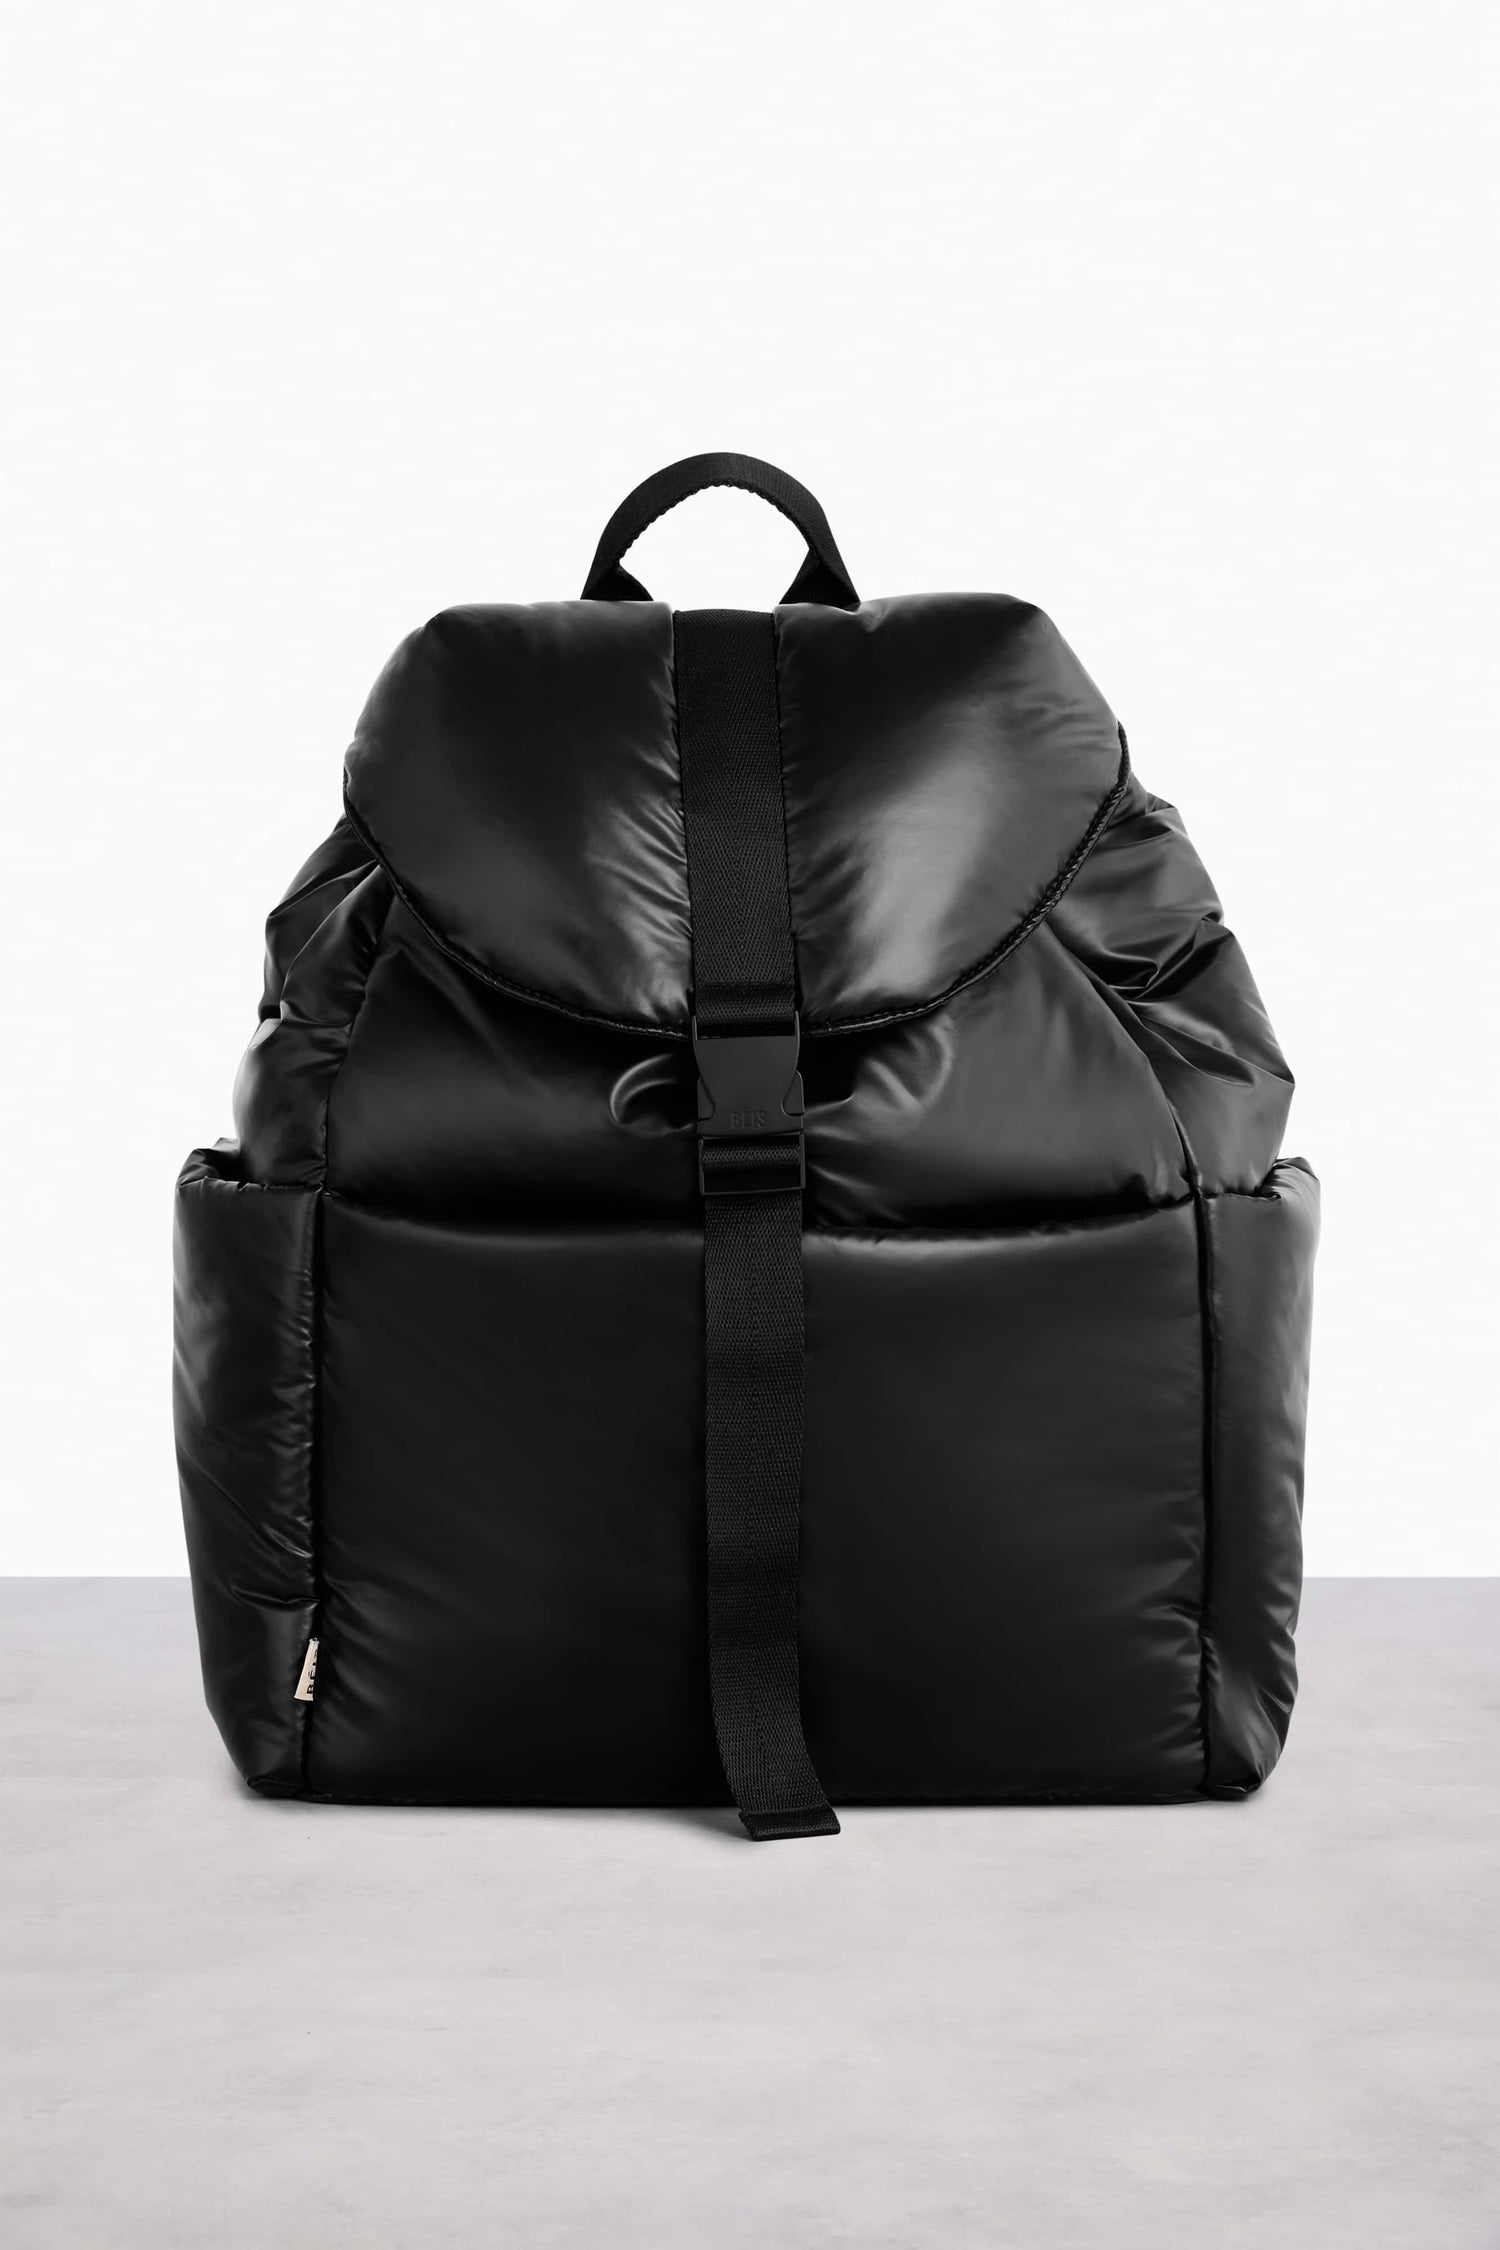 The Cargo Backpack